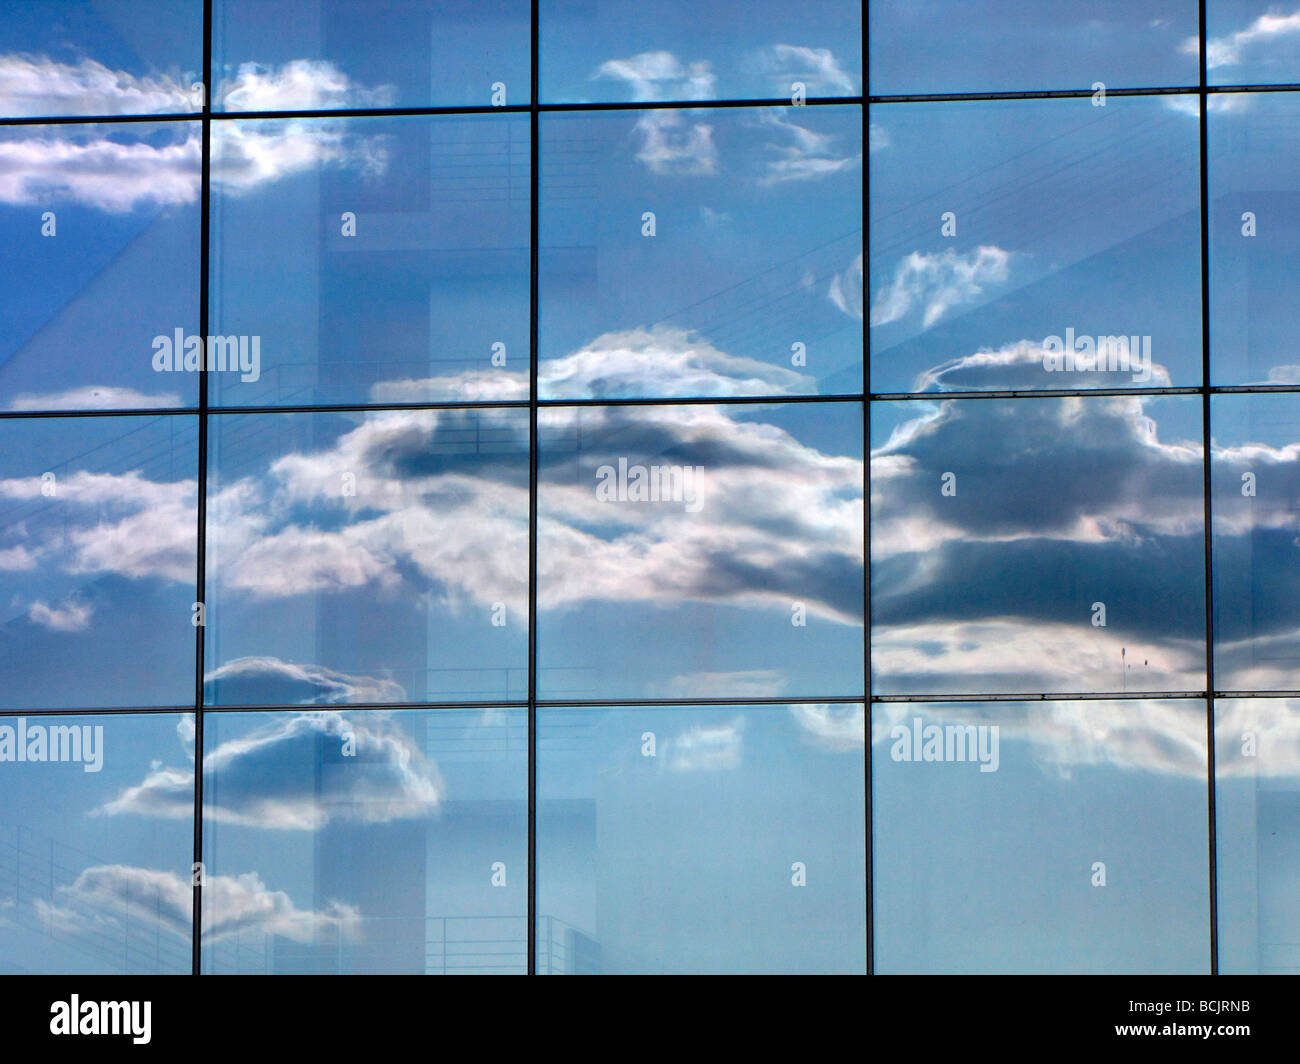 Reflection of clouds on glass facade Berlin Germany May 09 Stock Photo